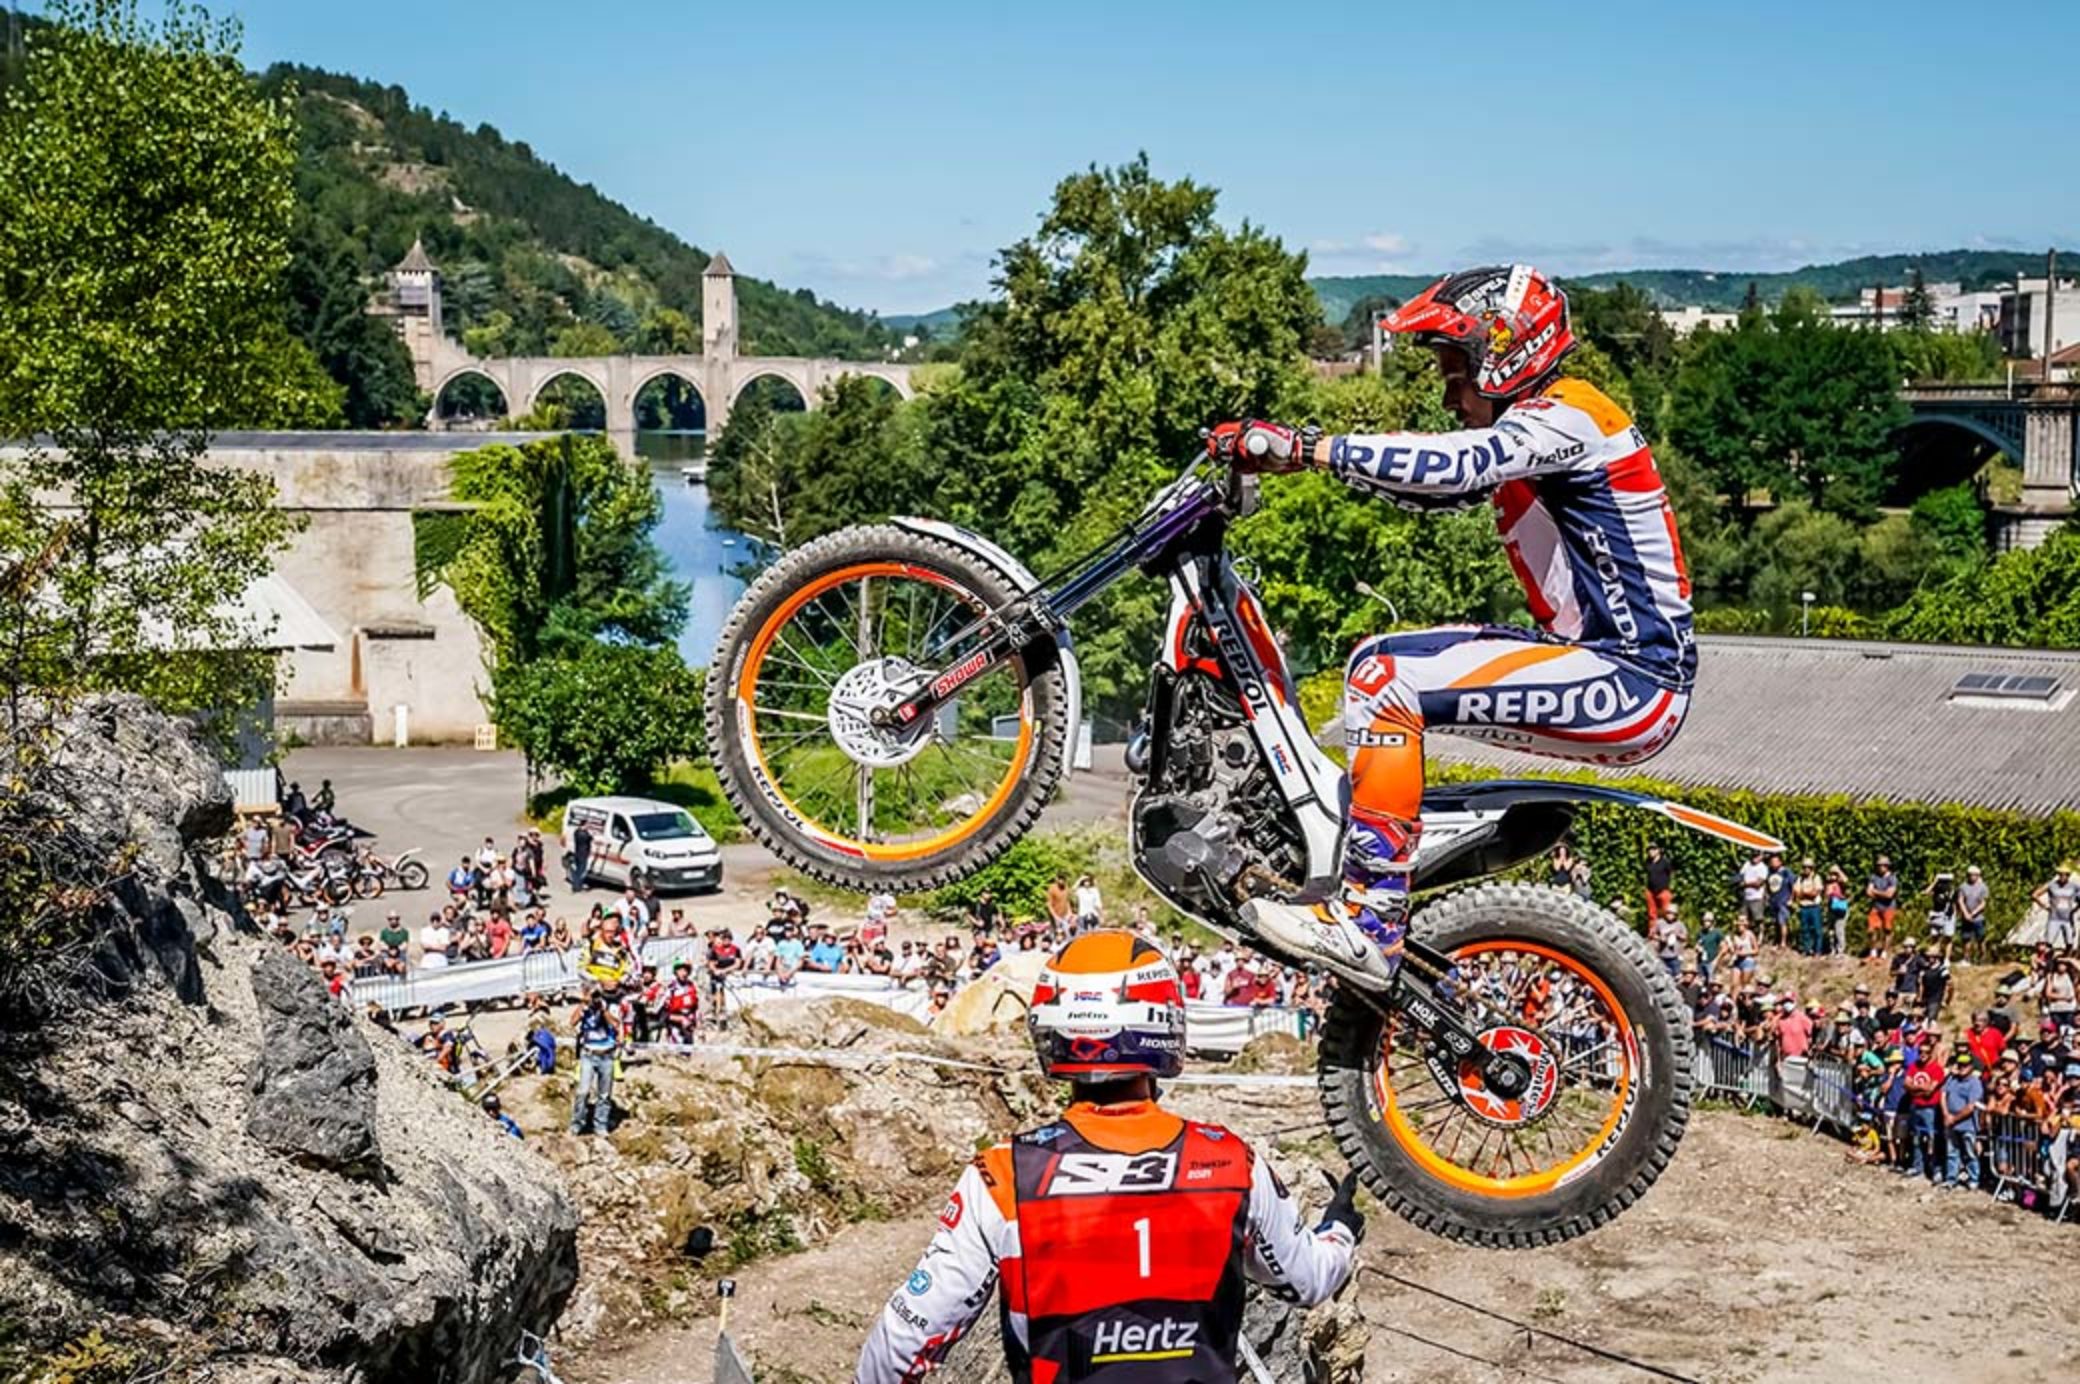 Toni Bou increases world championship leadership after the French GP